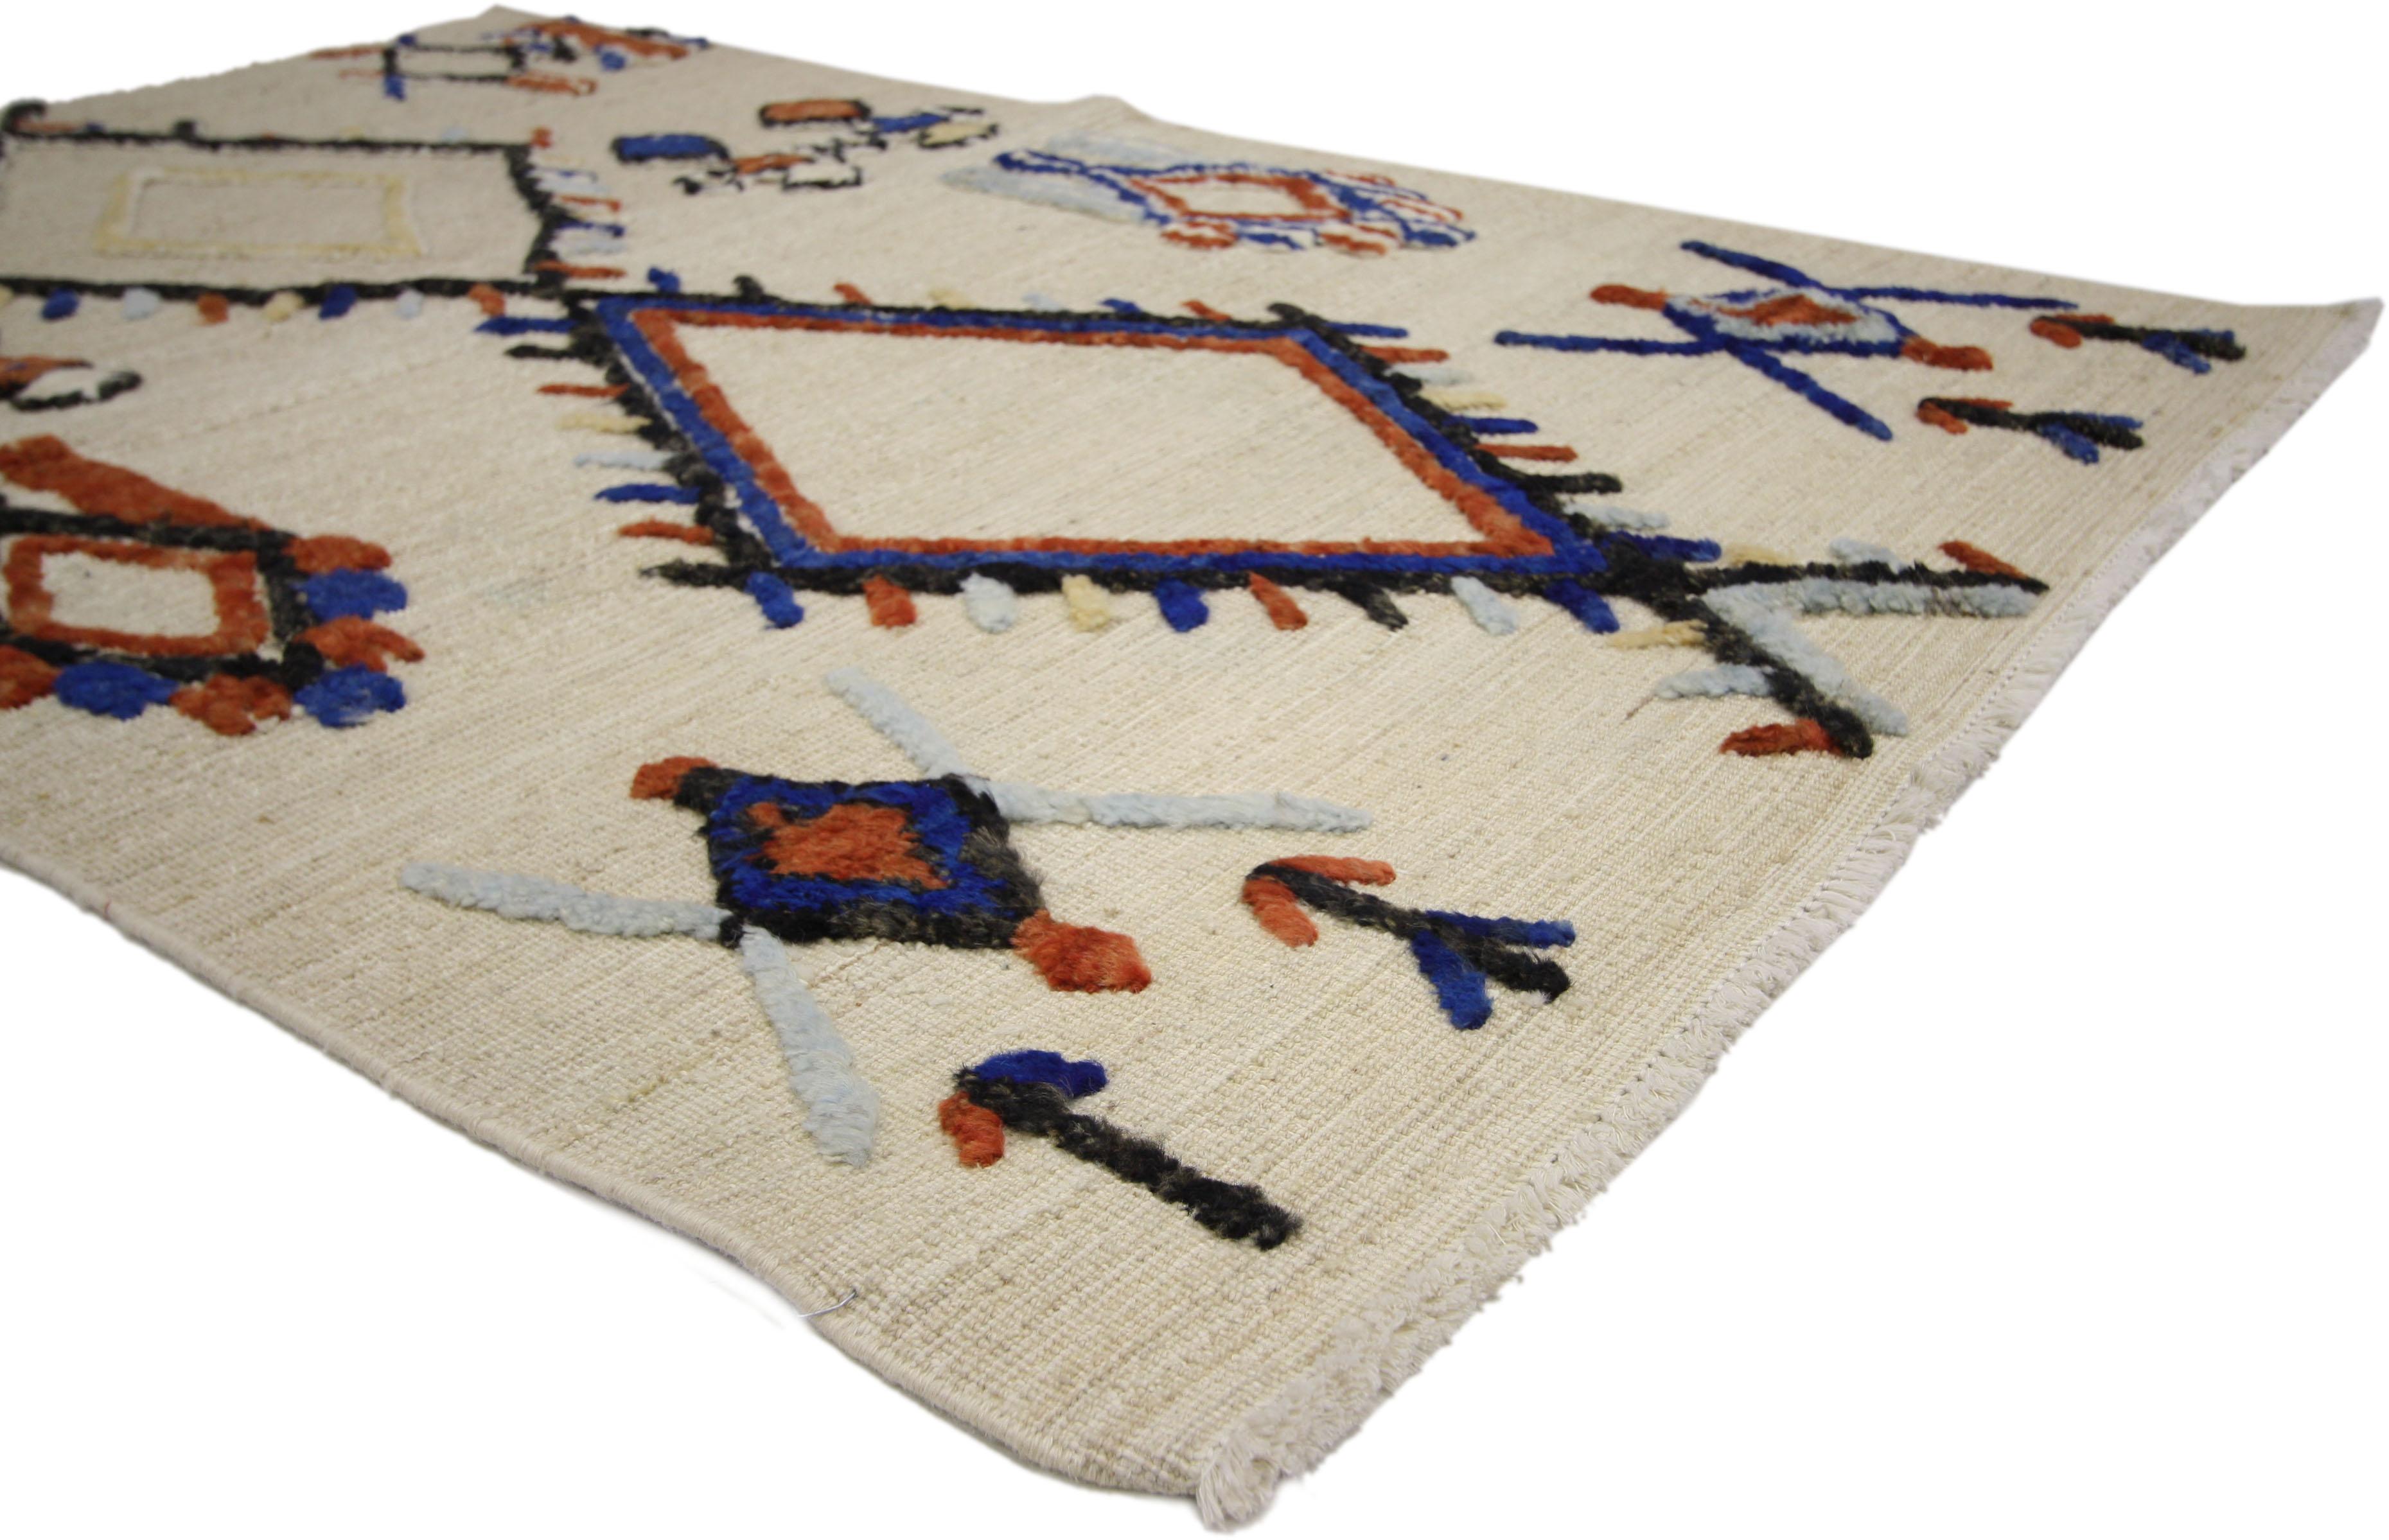 80274 Moroccan style Rug with Tribal style, high and low texture rug. This is a fantastic example of a two-layer high and low texture Moroccan style rug, woven with a clean and simple, yet boho chic composition. Featuring a high and low pile to